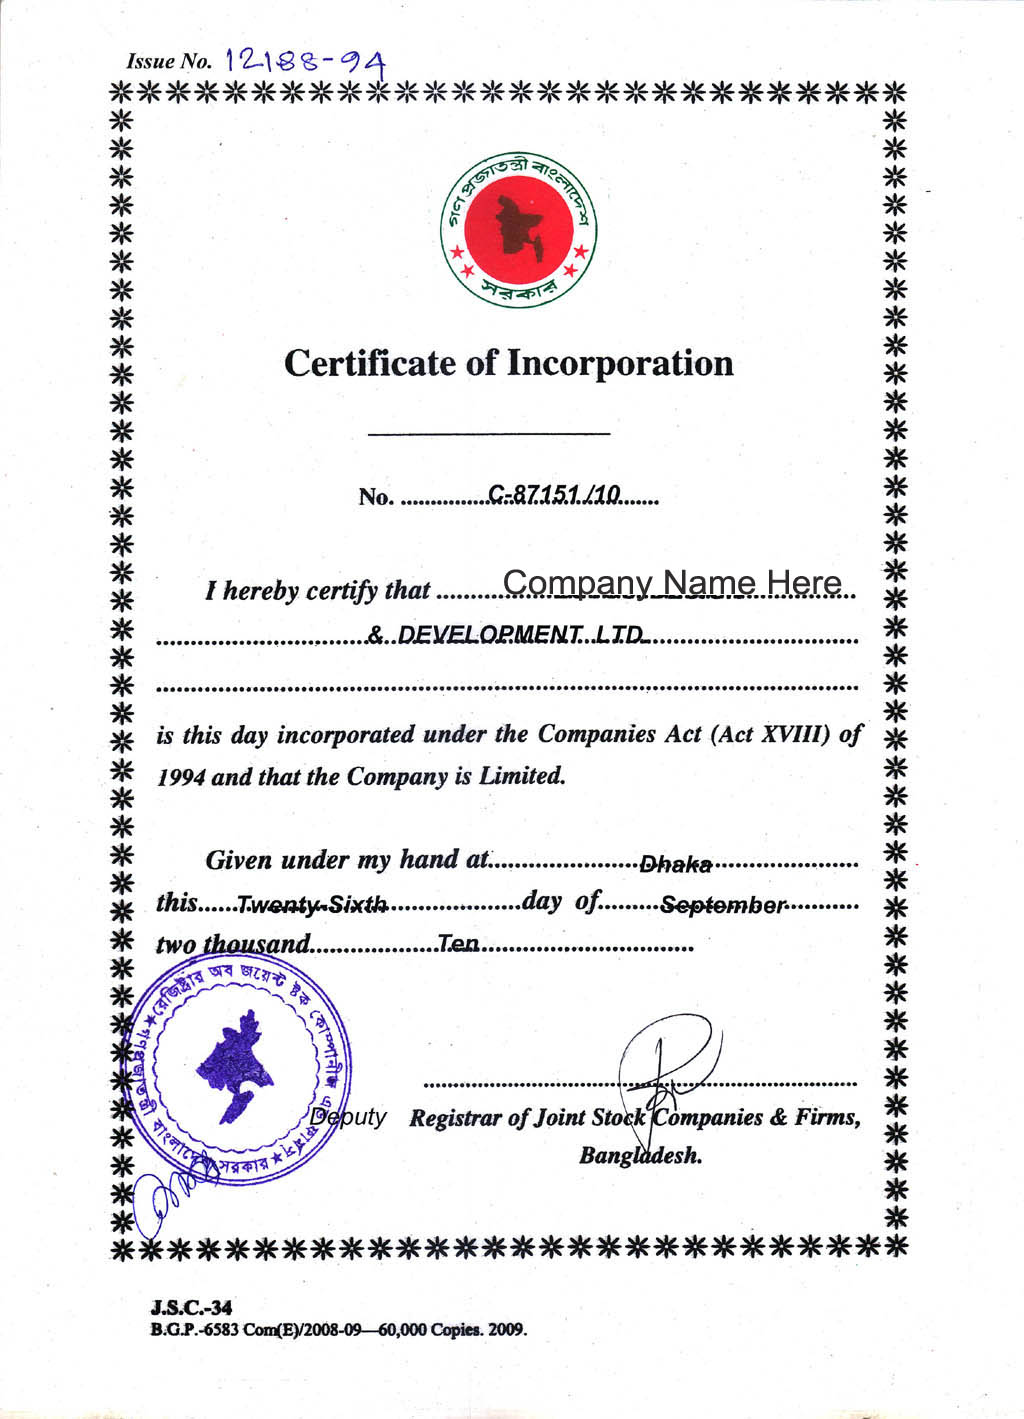 How to Get Incorporation Certificate for Private Ltd Company   A ...